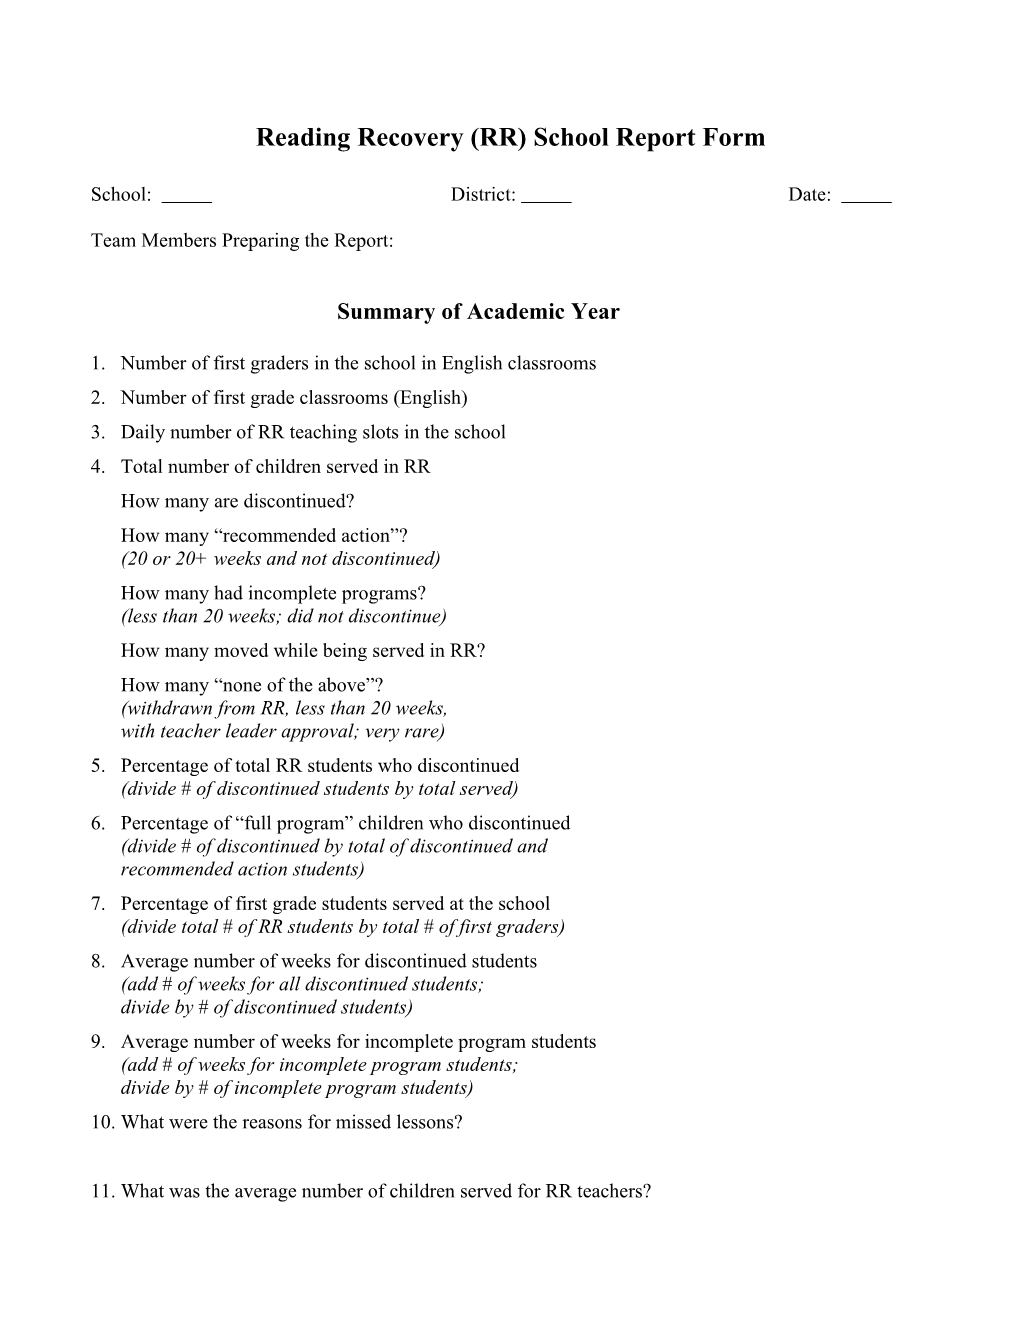 Reading Recovery (RR) School Report Form